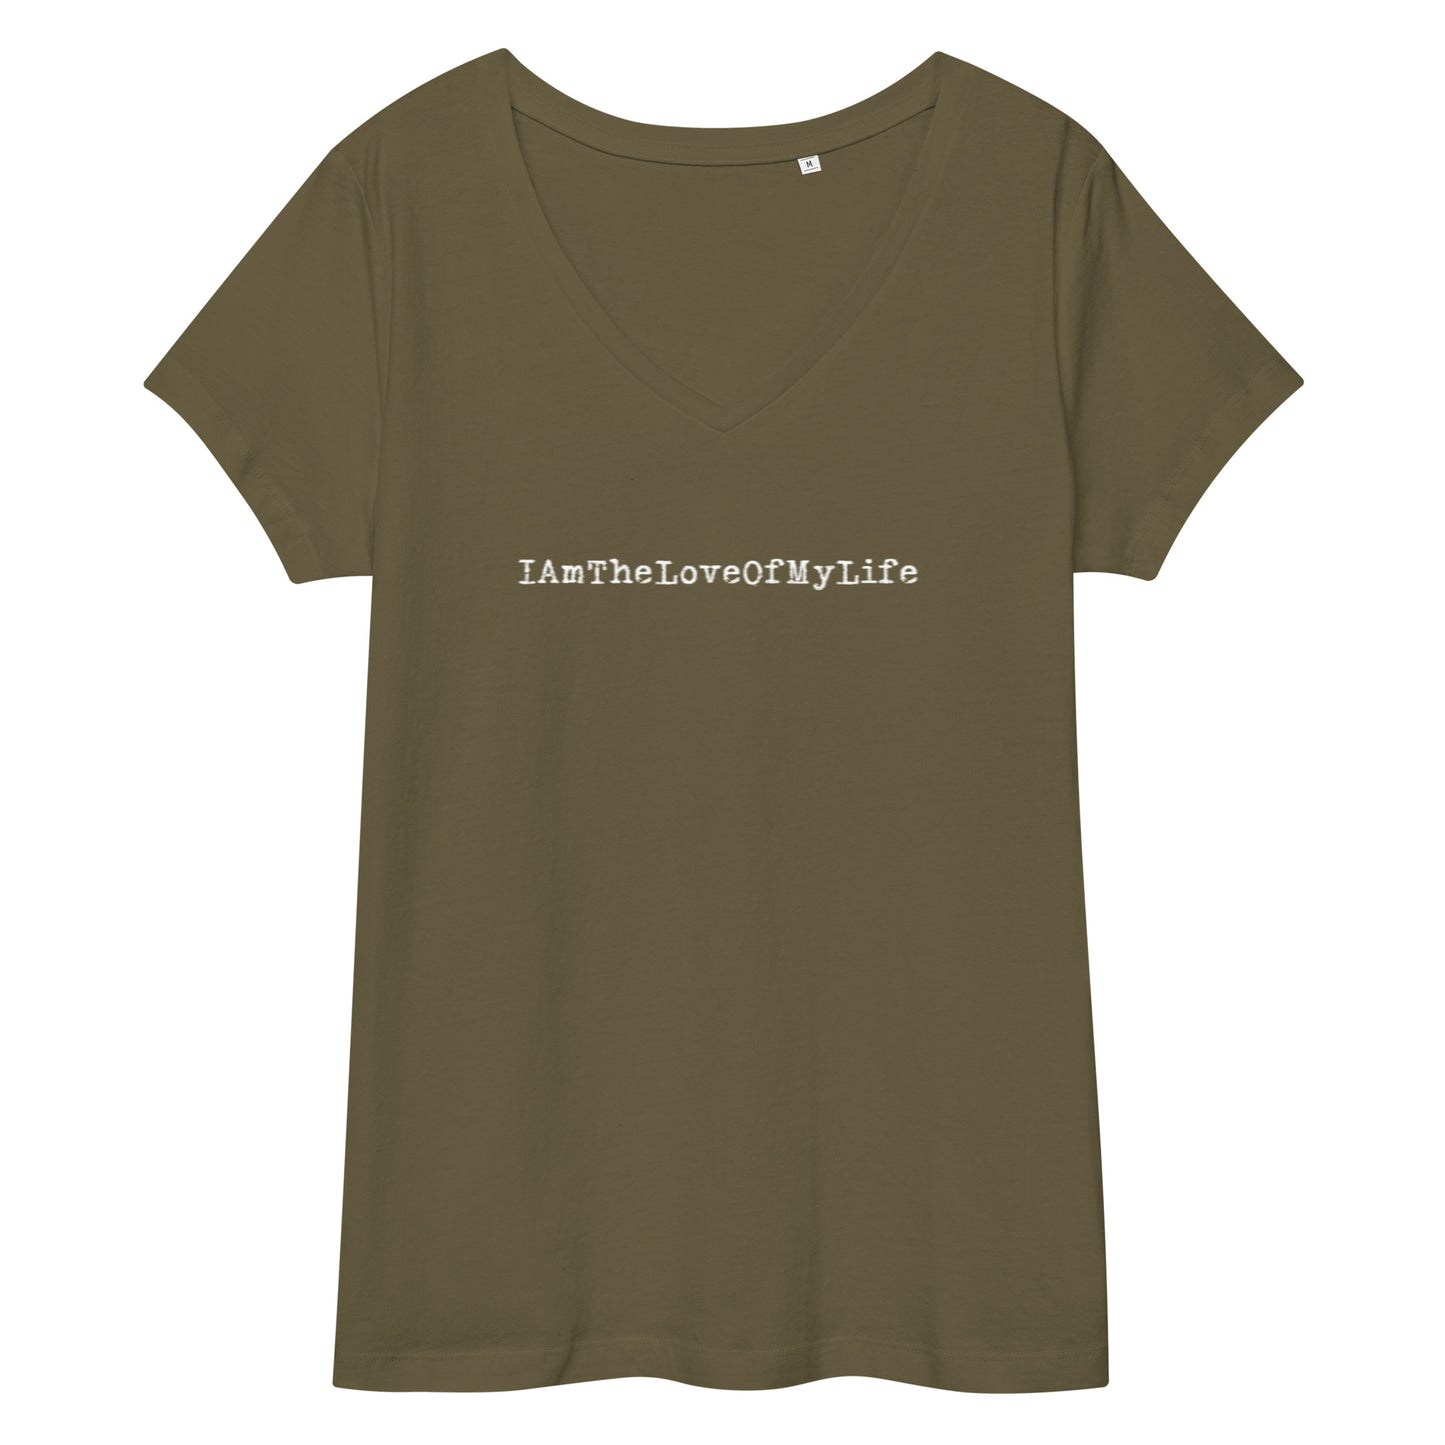 IAmTheLoveOfMyLife Women’s fitted v-neck t-shirt